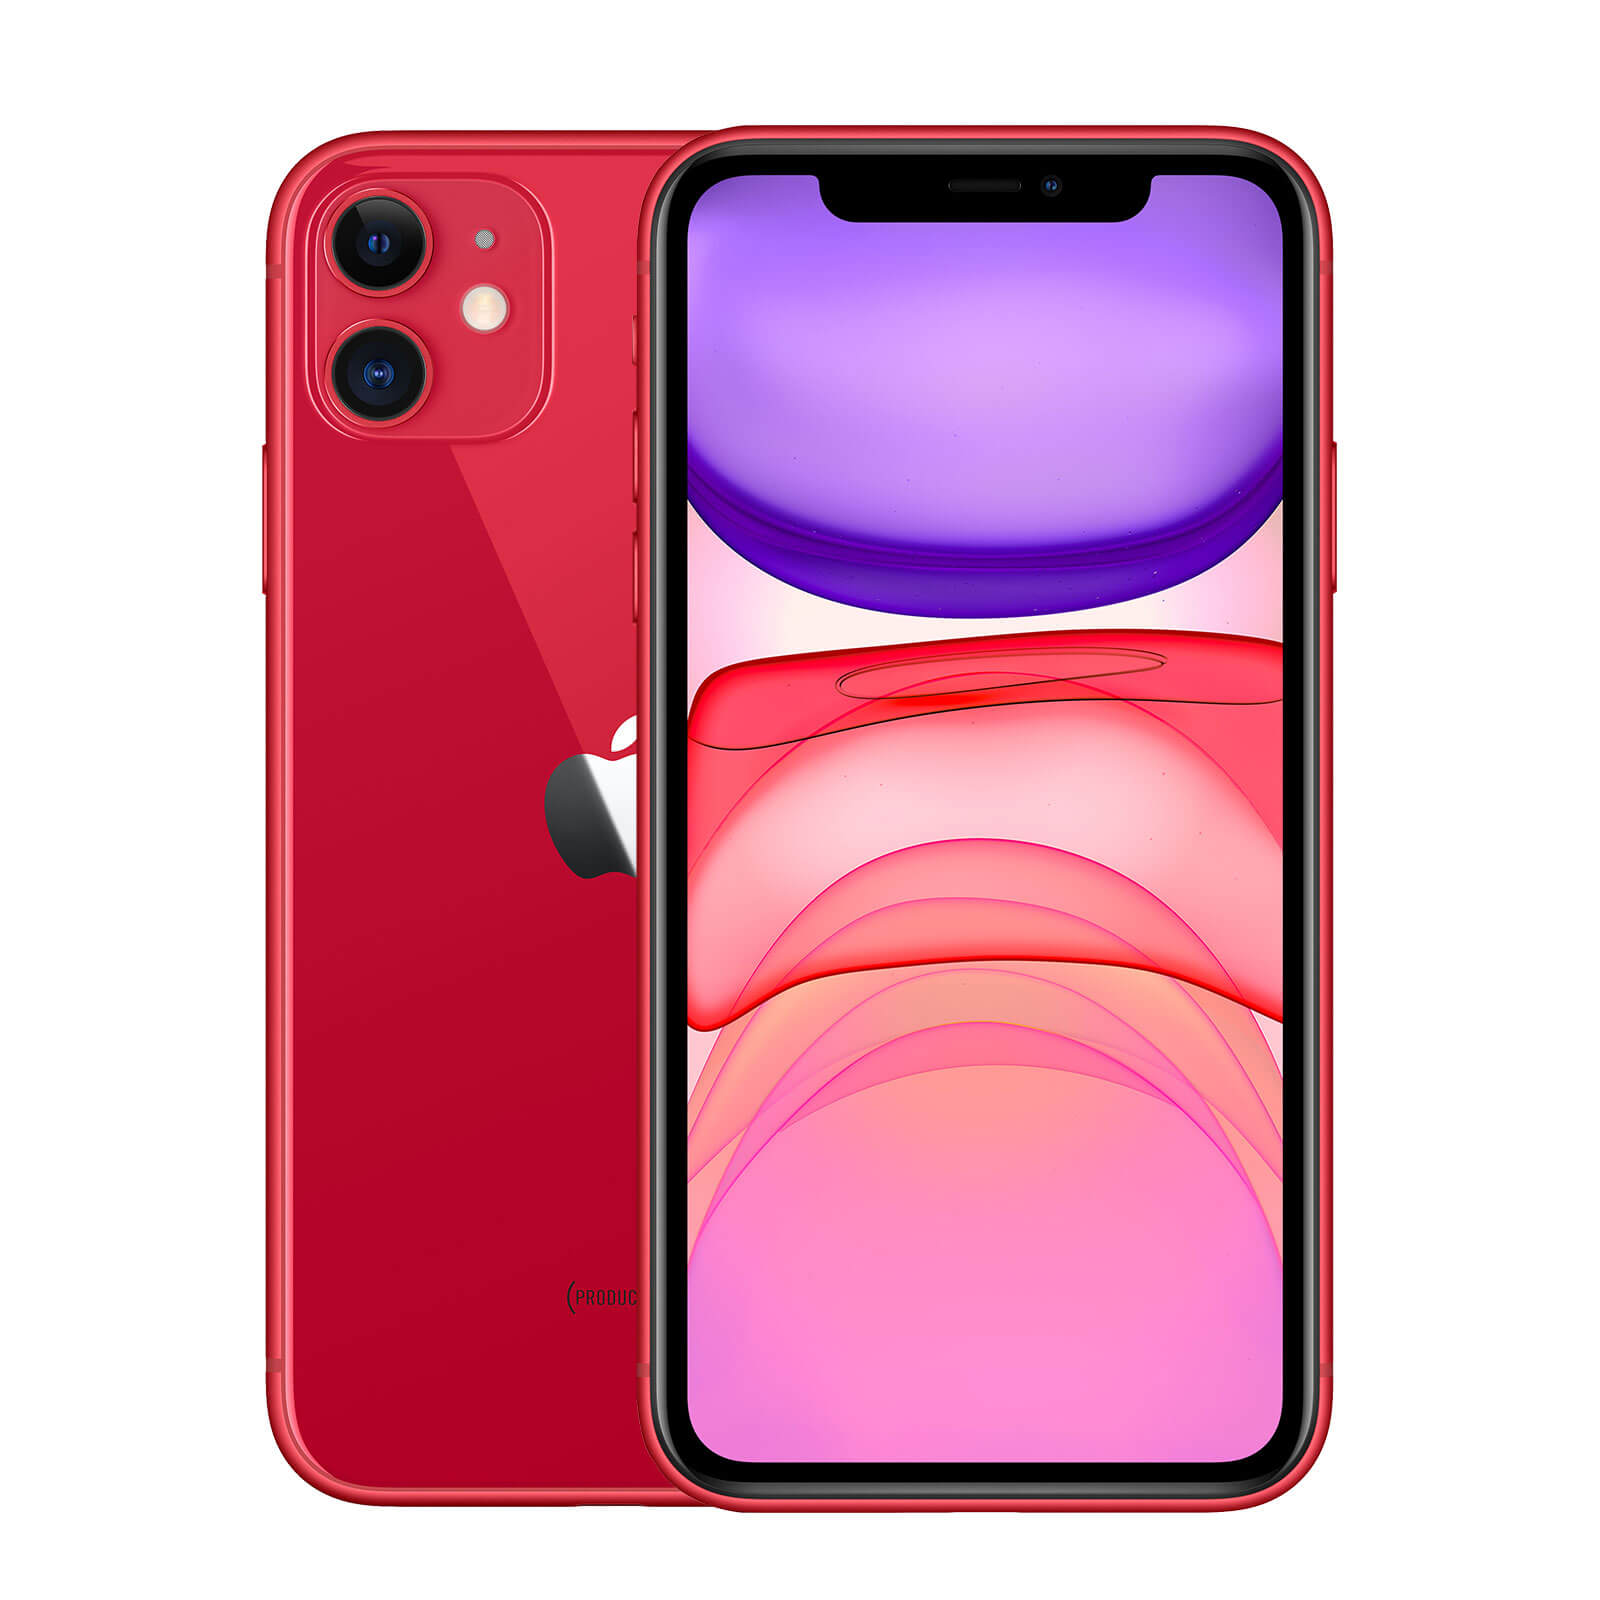 Apple iPhone 11 256GB Product Red Makellos - Ohne Vertrag